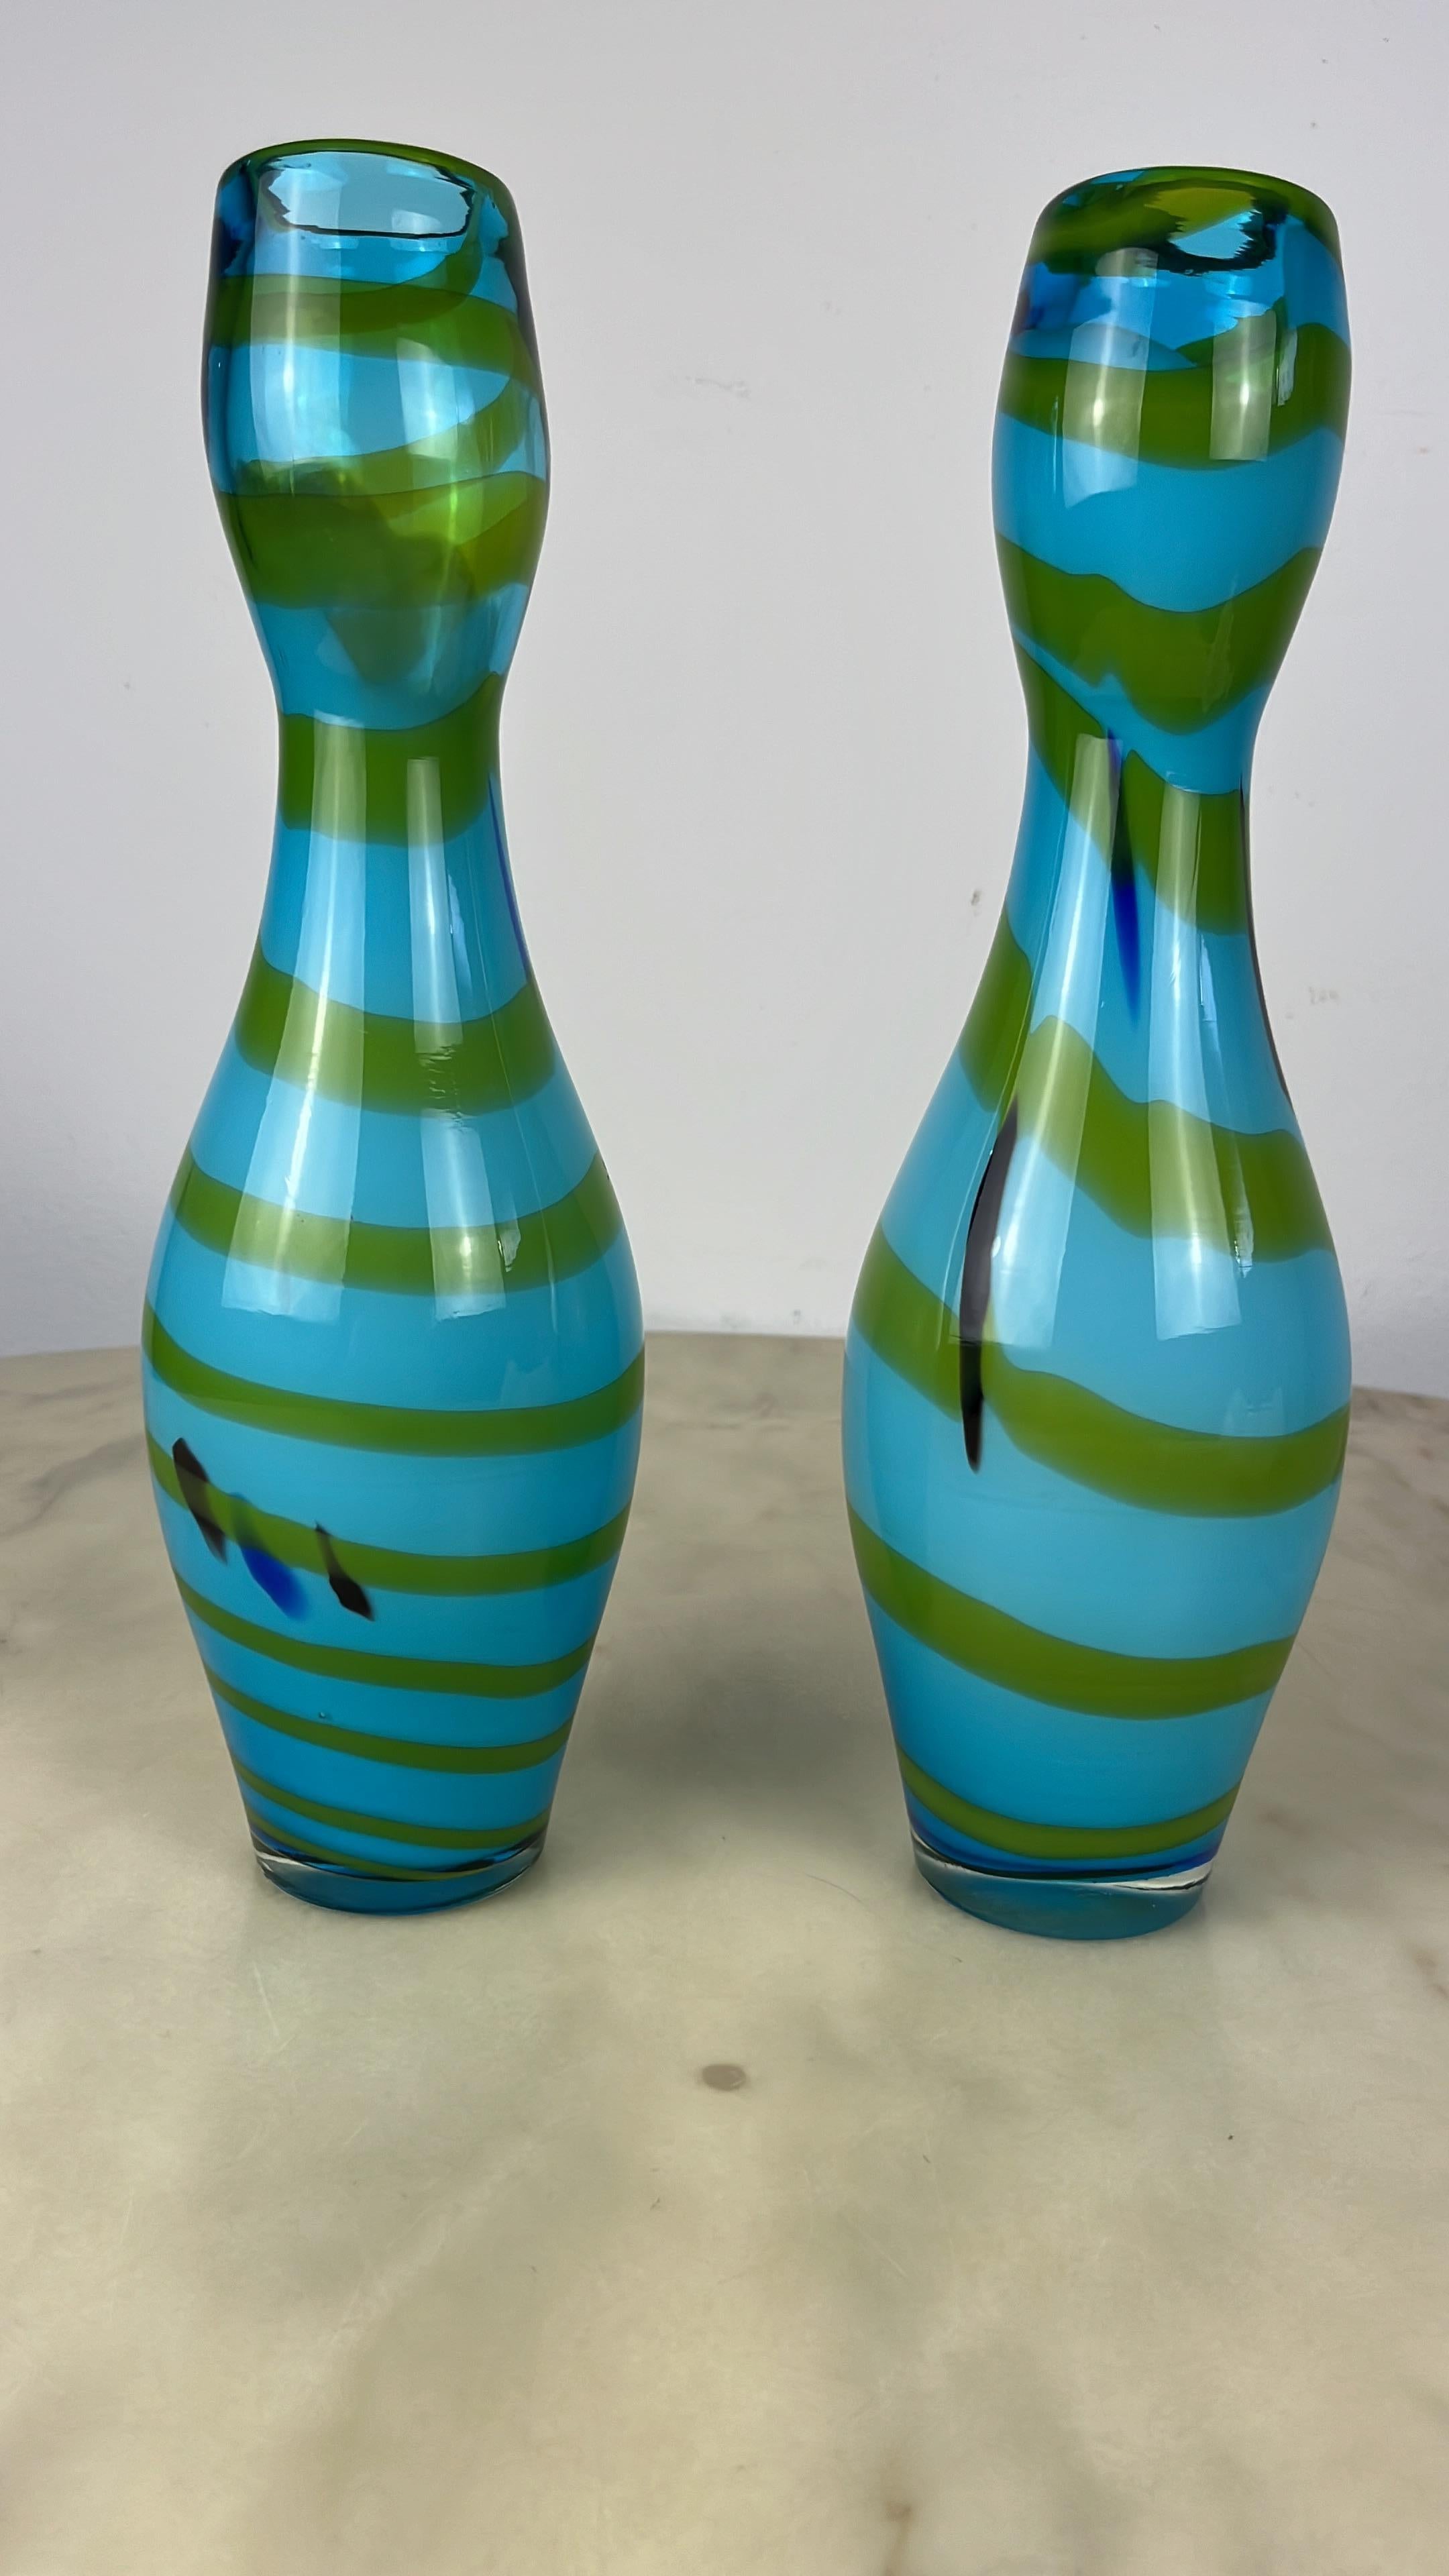 Pair of polychrome Murano vases, attributed To Gio Ponti, 1970s
They have always belonged to my family. Purchased during a pleasure trip to Venice. You can see their authenticity because if you look carefully they are slightly different from each